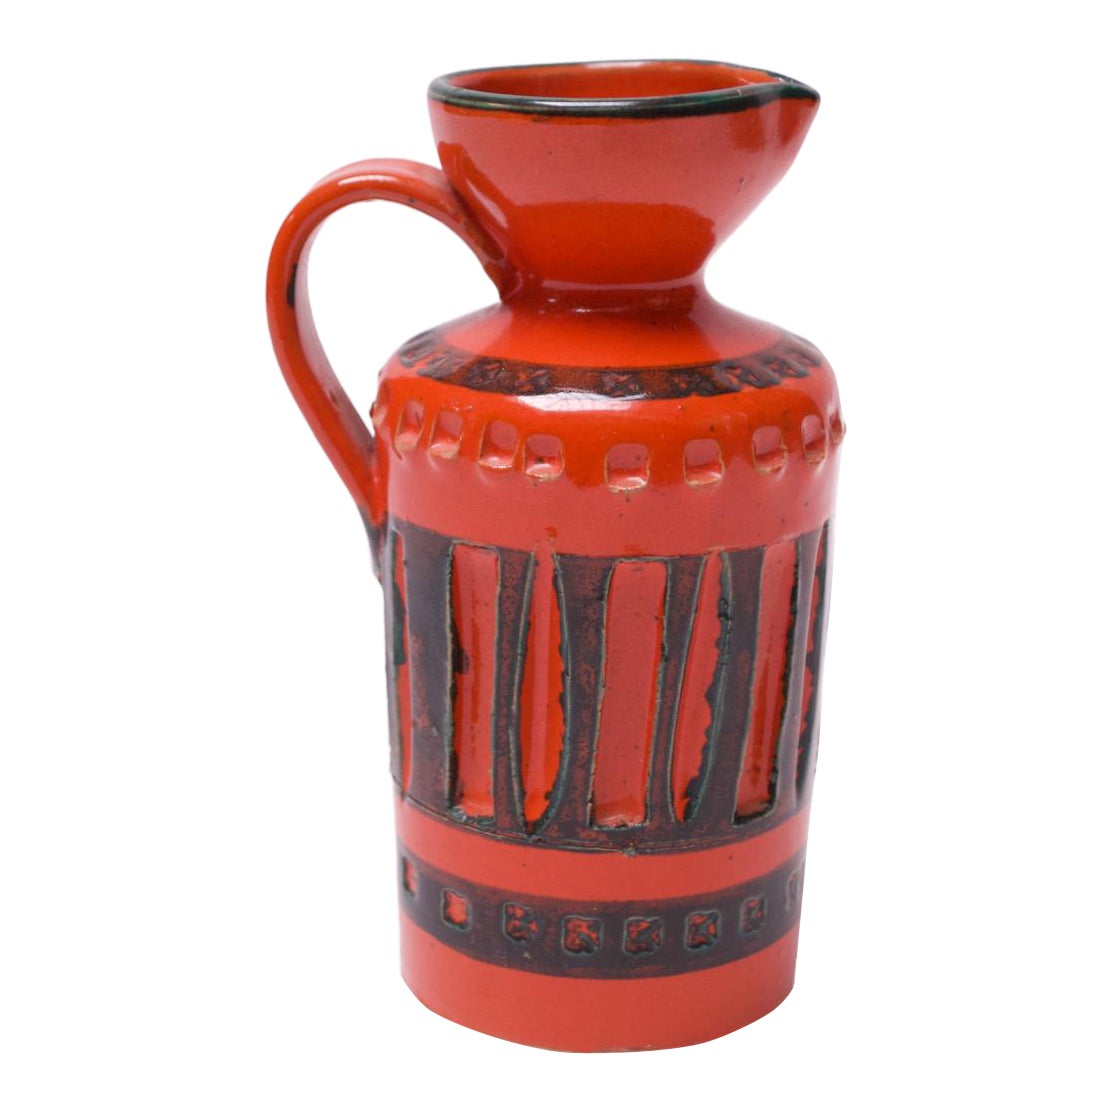 Made in Italy Orange Pitcher